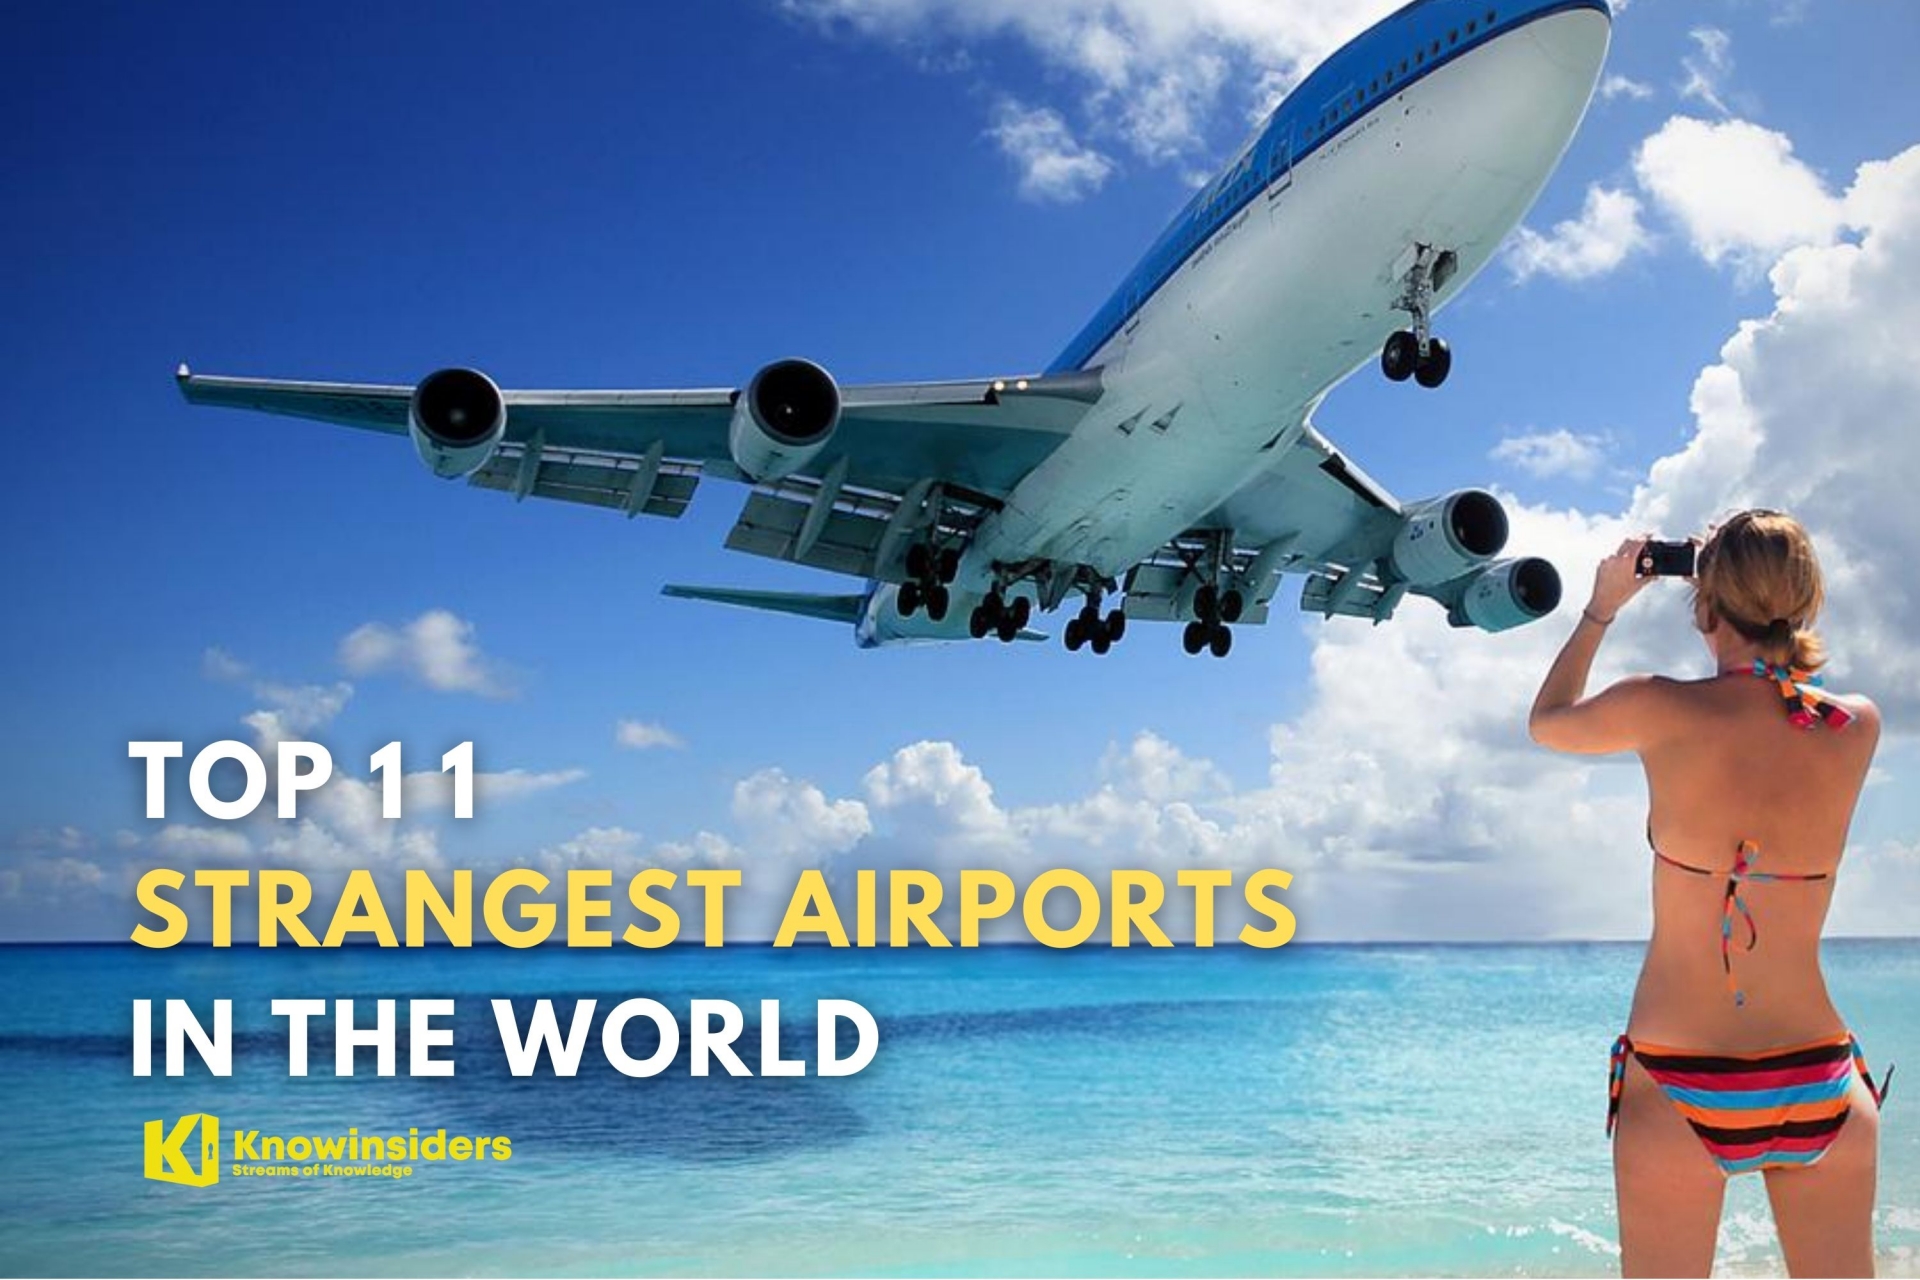 Top 11 Strangest Airports in the World Today